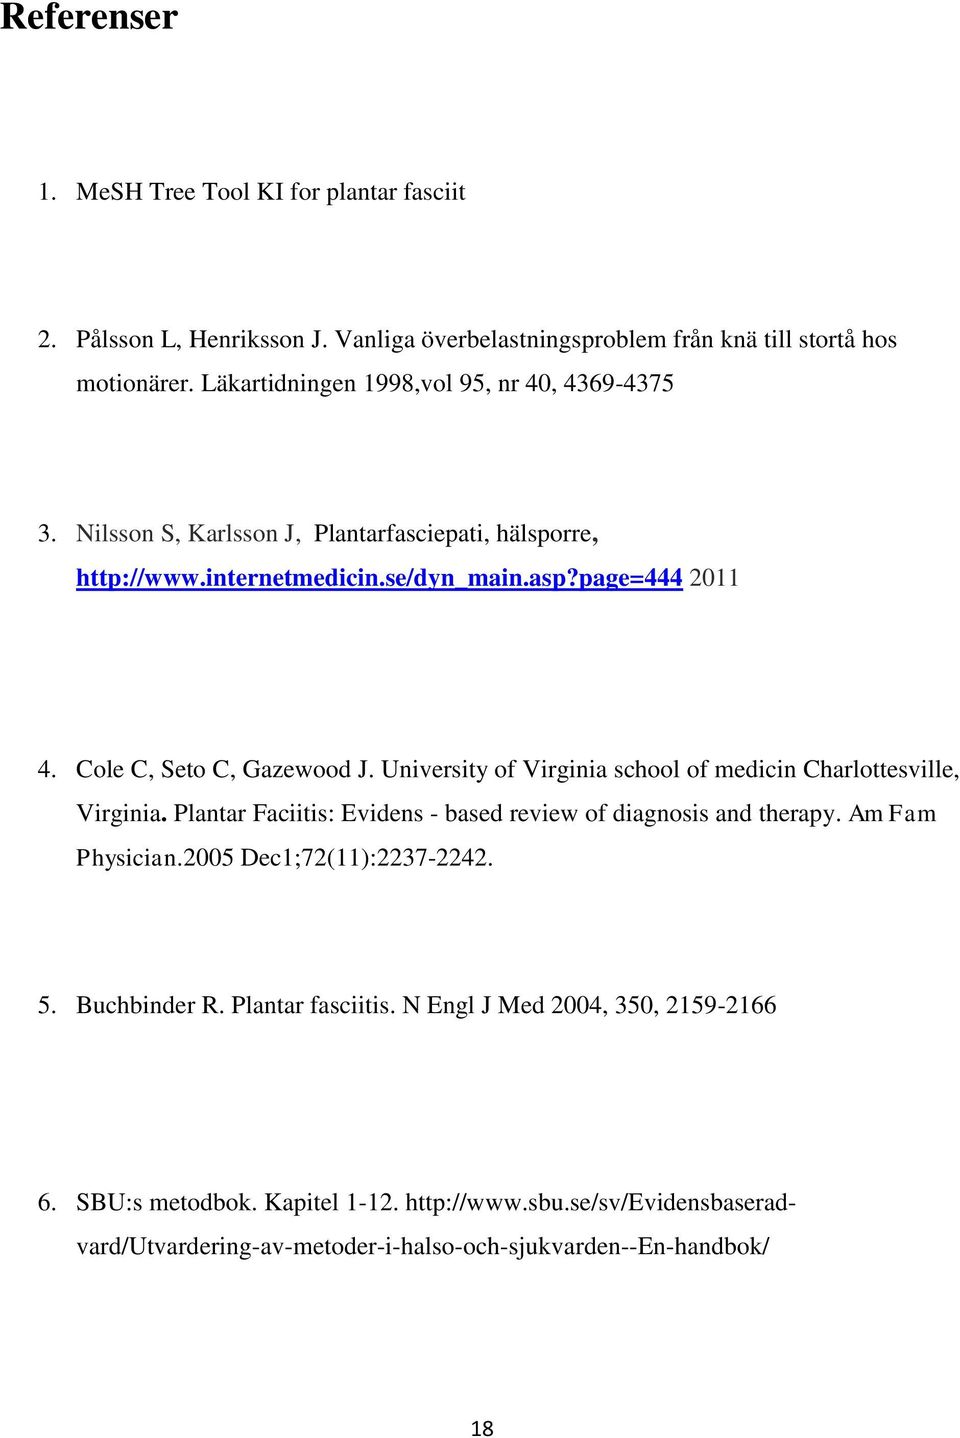 Cole C, Seto C, Gazewood J. University of Virginia school of medicin Charlottesville, Virginia. Plantar Faciitis: Evidens - based review of diagnosis and therapy. Am Fam Physician.